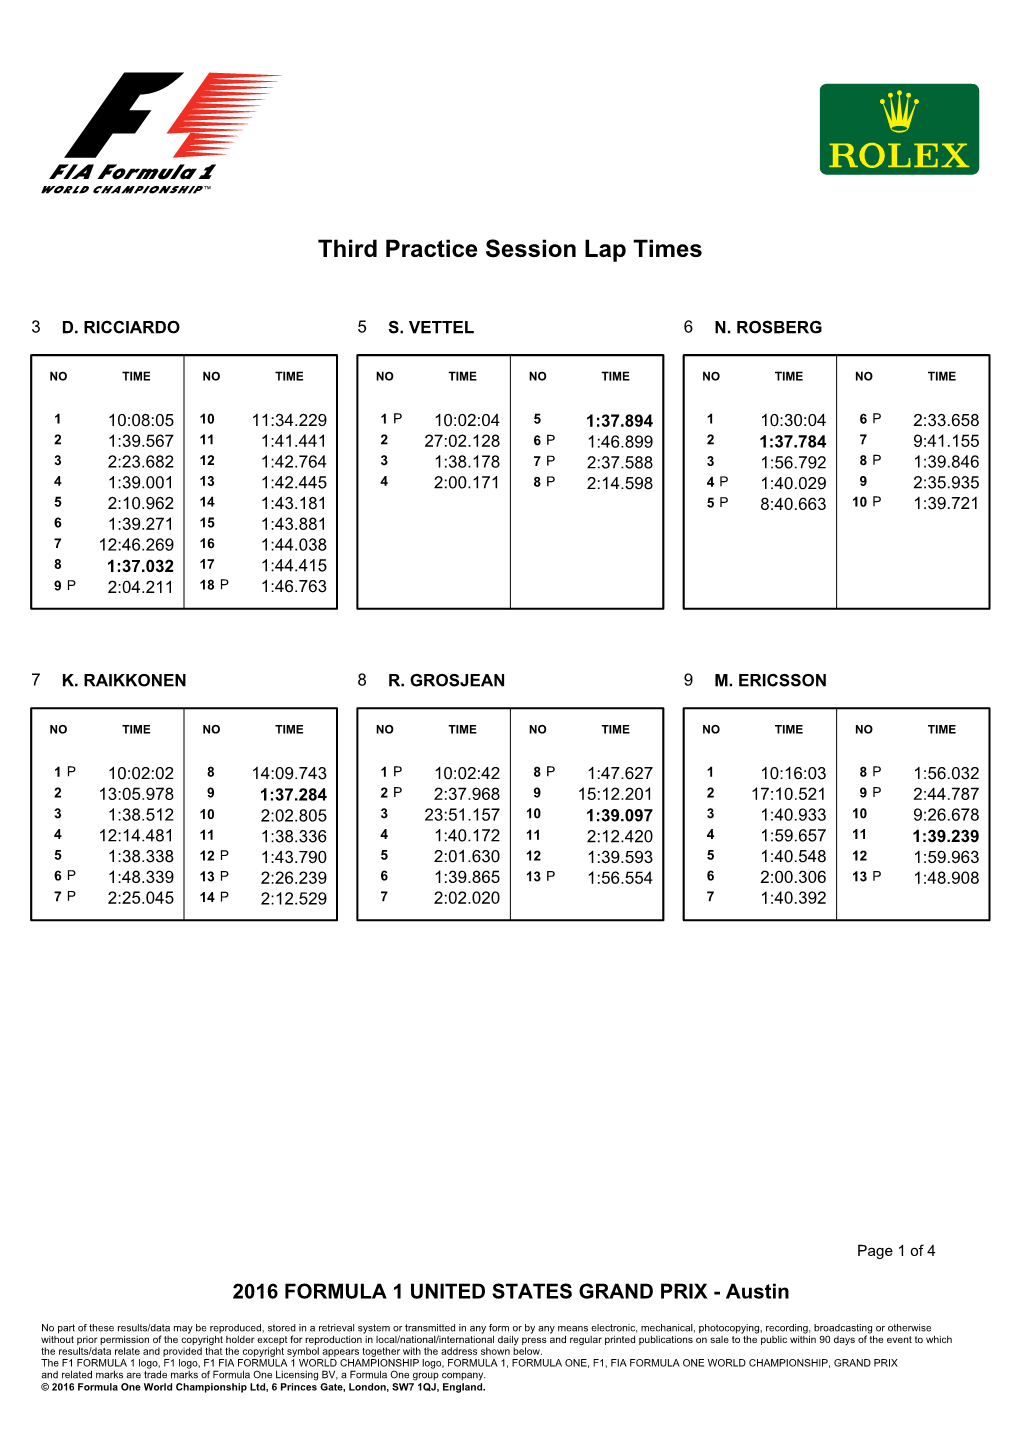 Third Practice Session Lap Times